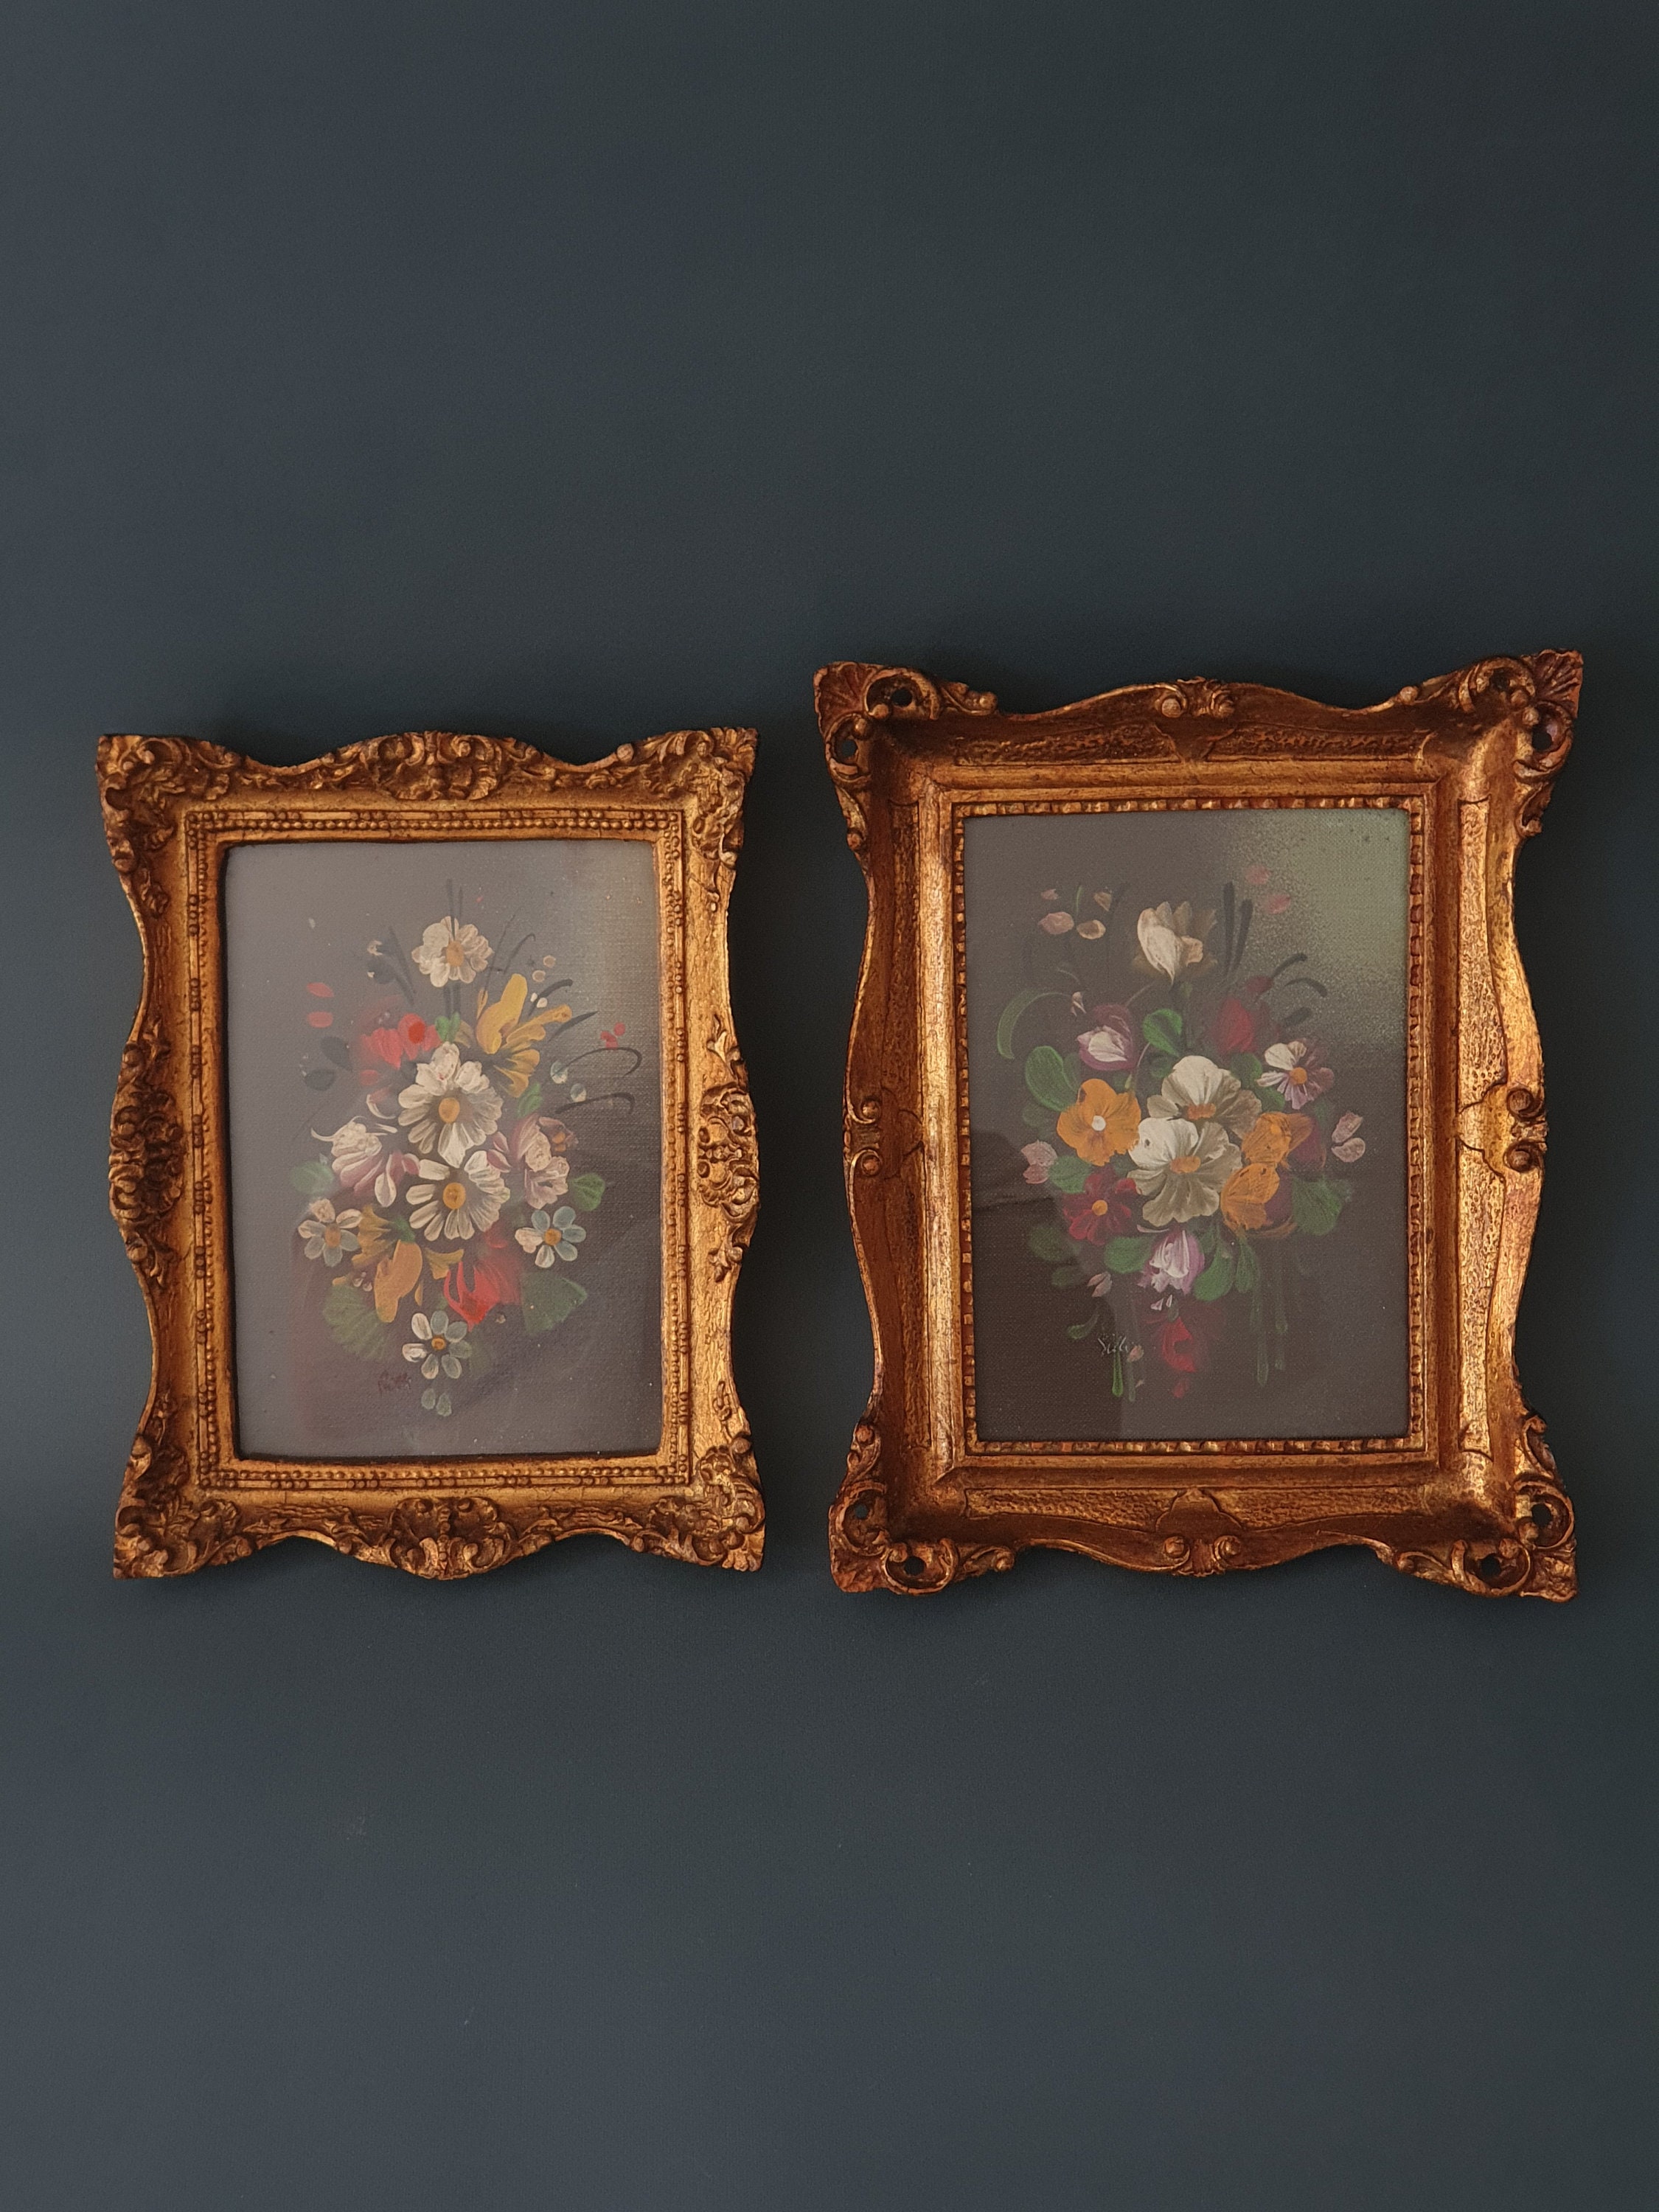 Round Flower Photo Picture Decorative Frame Floral Ornate Romantic Carved  Wood Wall Mounted Home Decor Embroidery Frames 